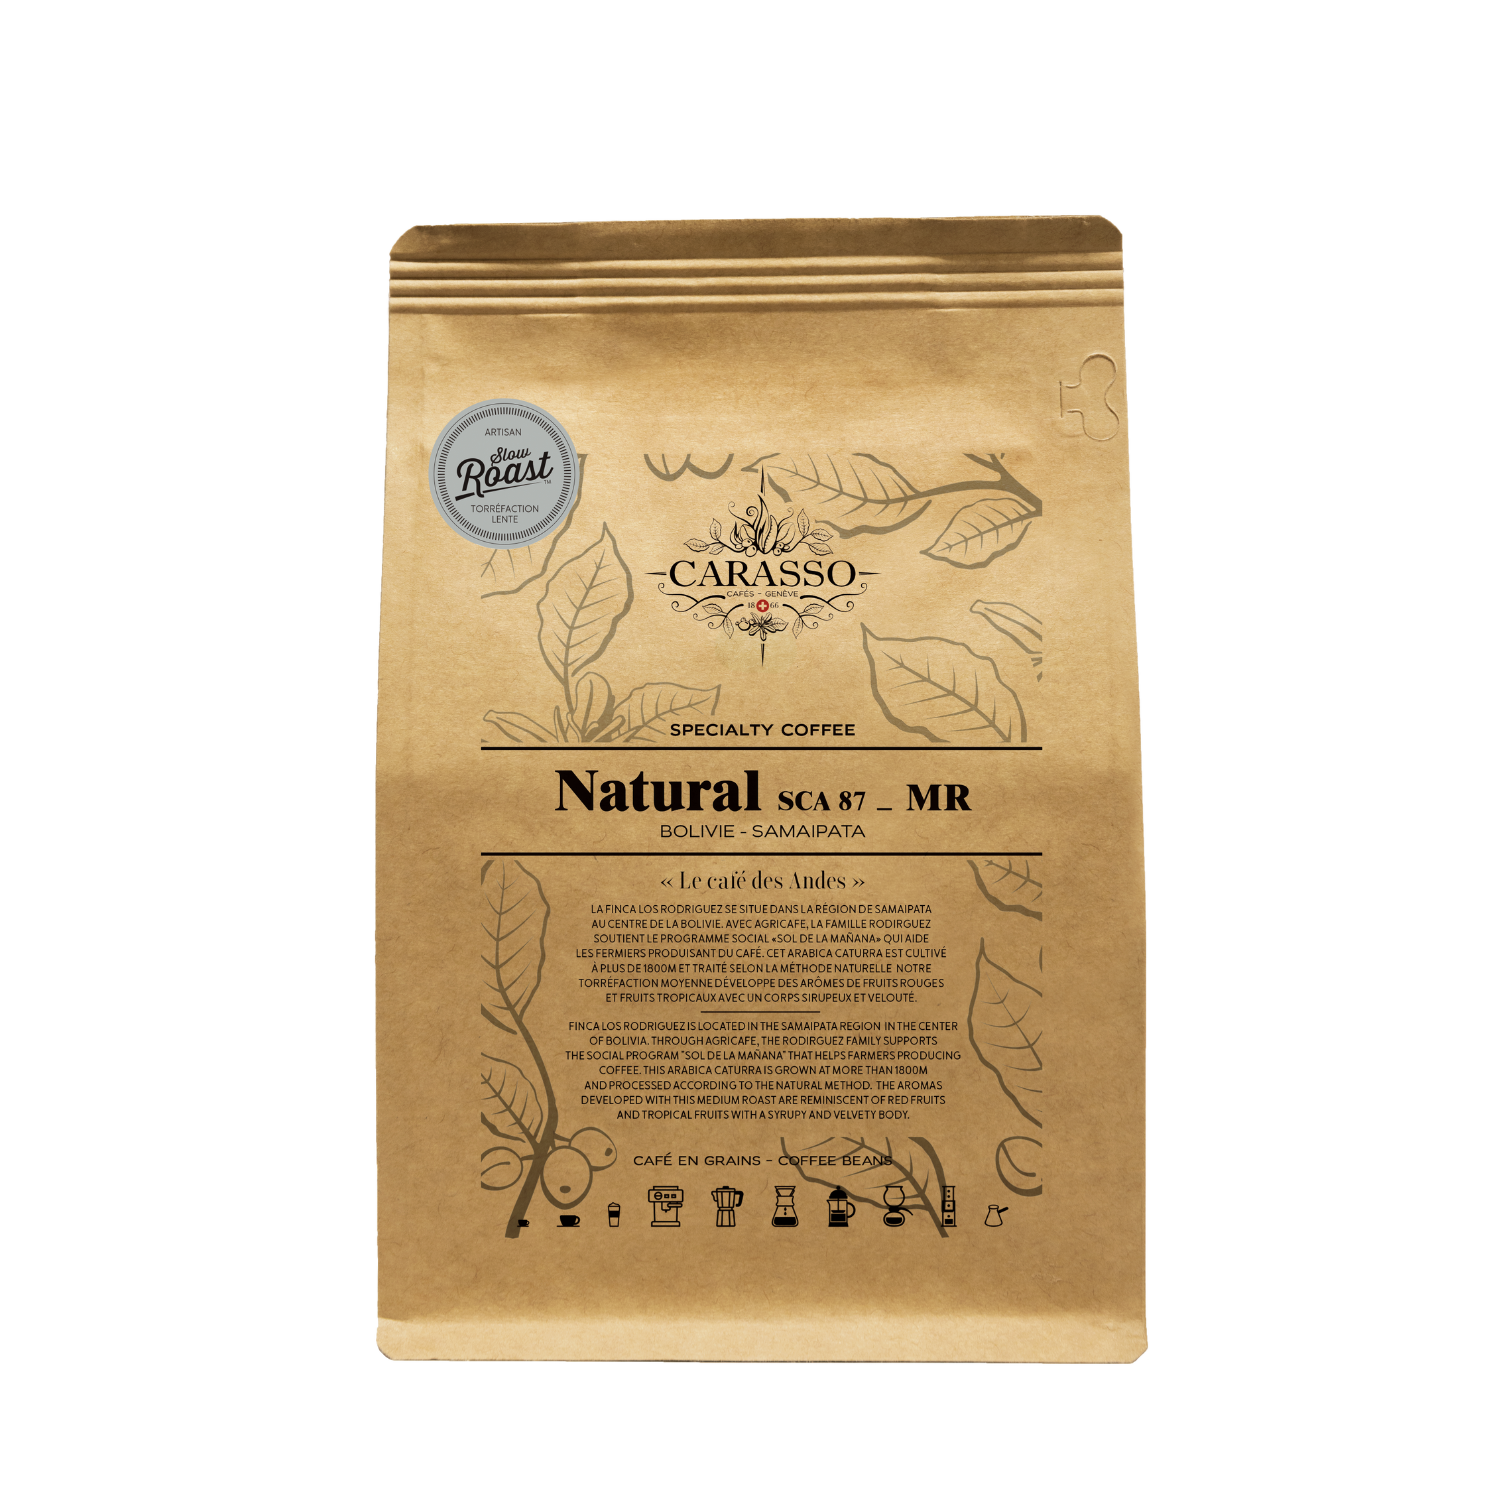 Naural SCA 87 MR coffee in beans or ground - Bolivia